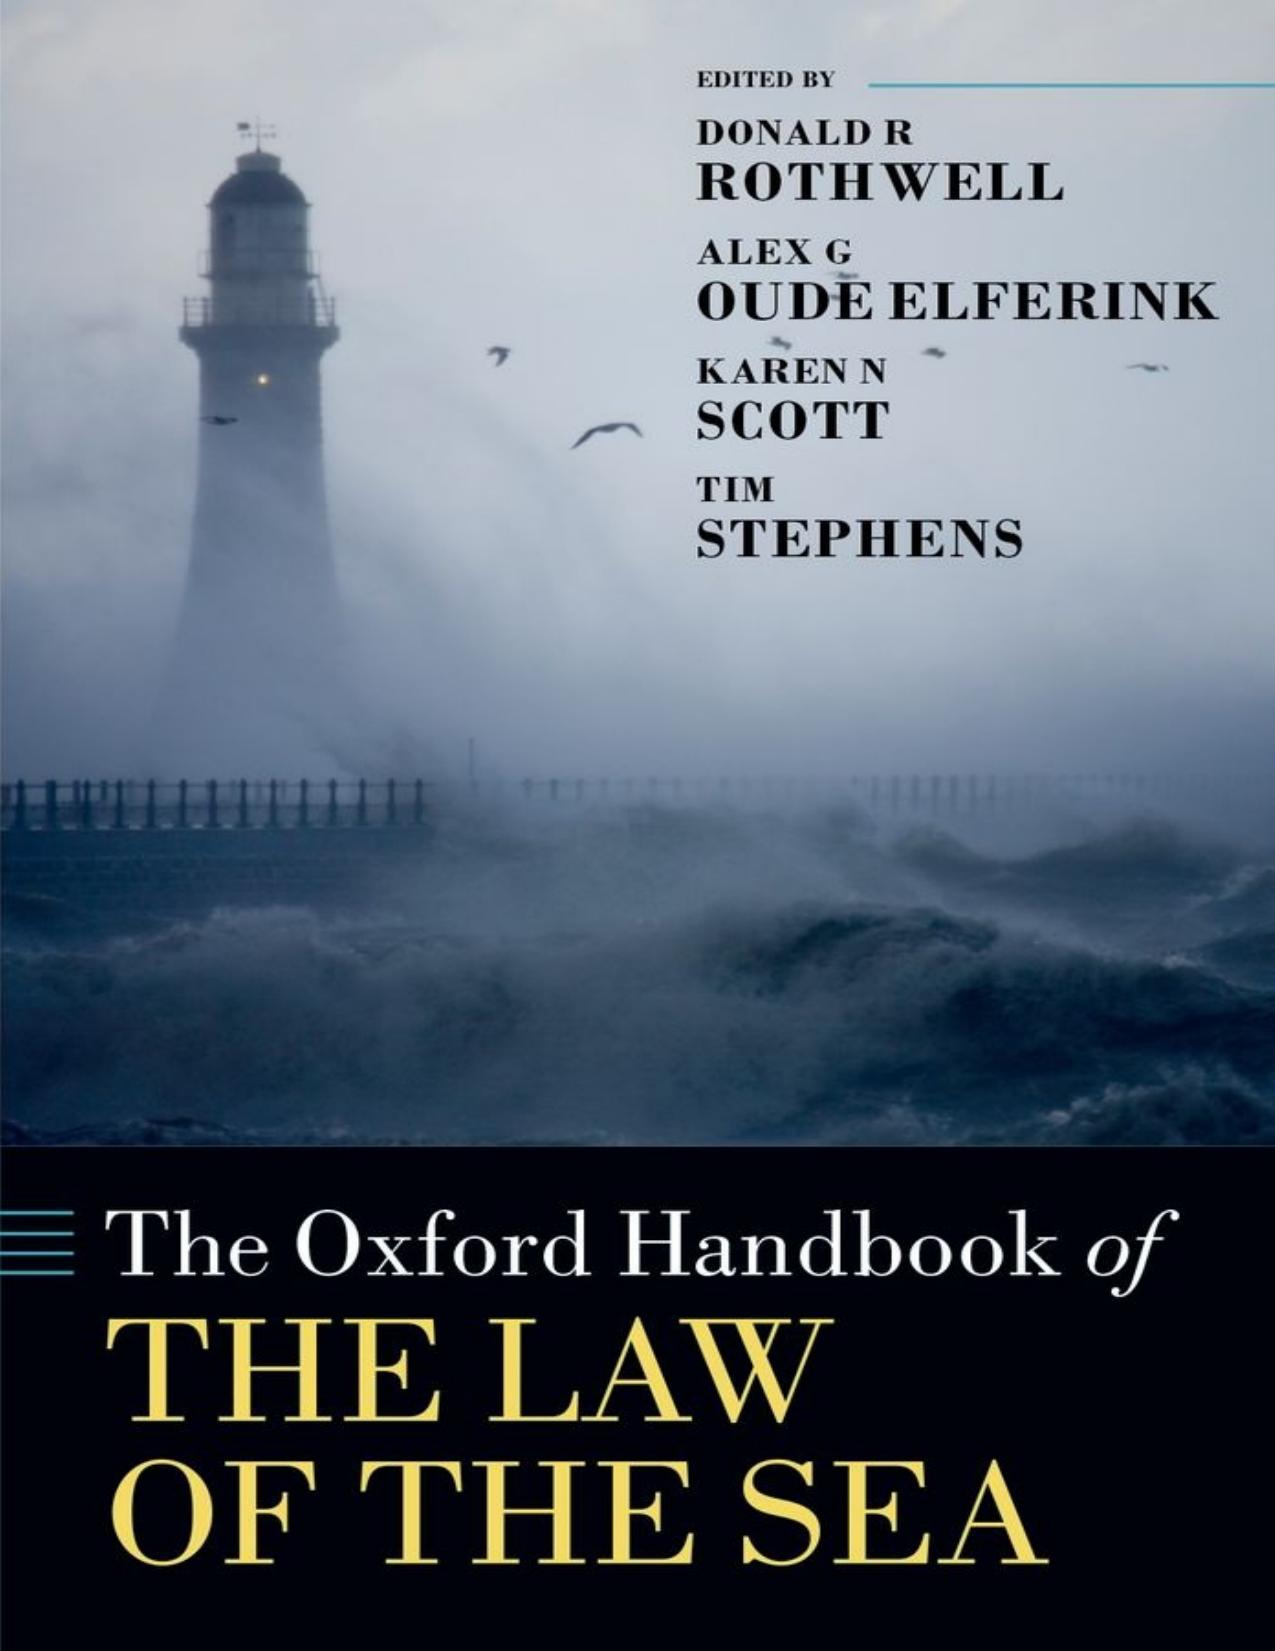 The Oxford Handbook of the Law of the Sea